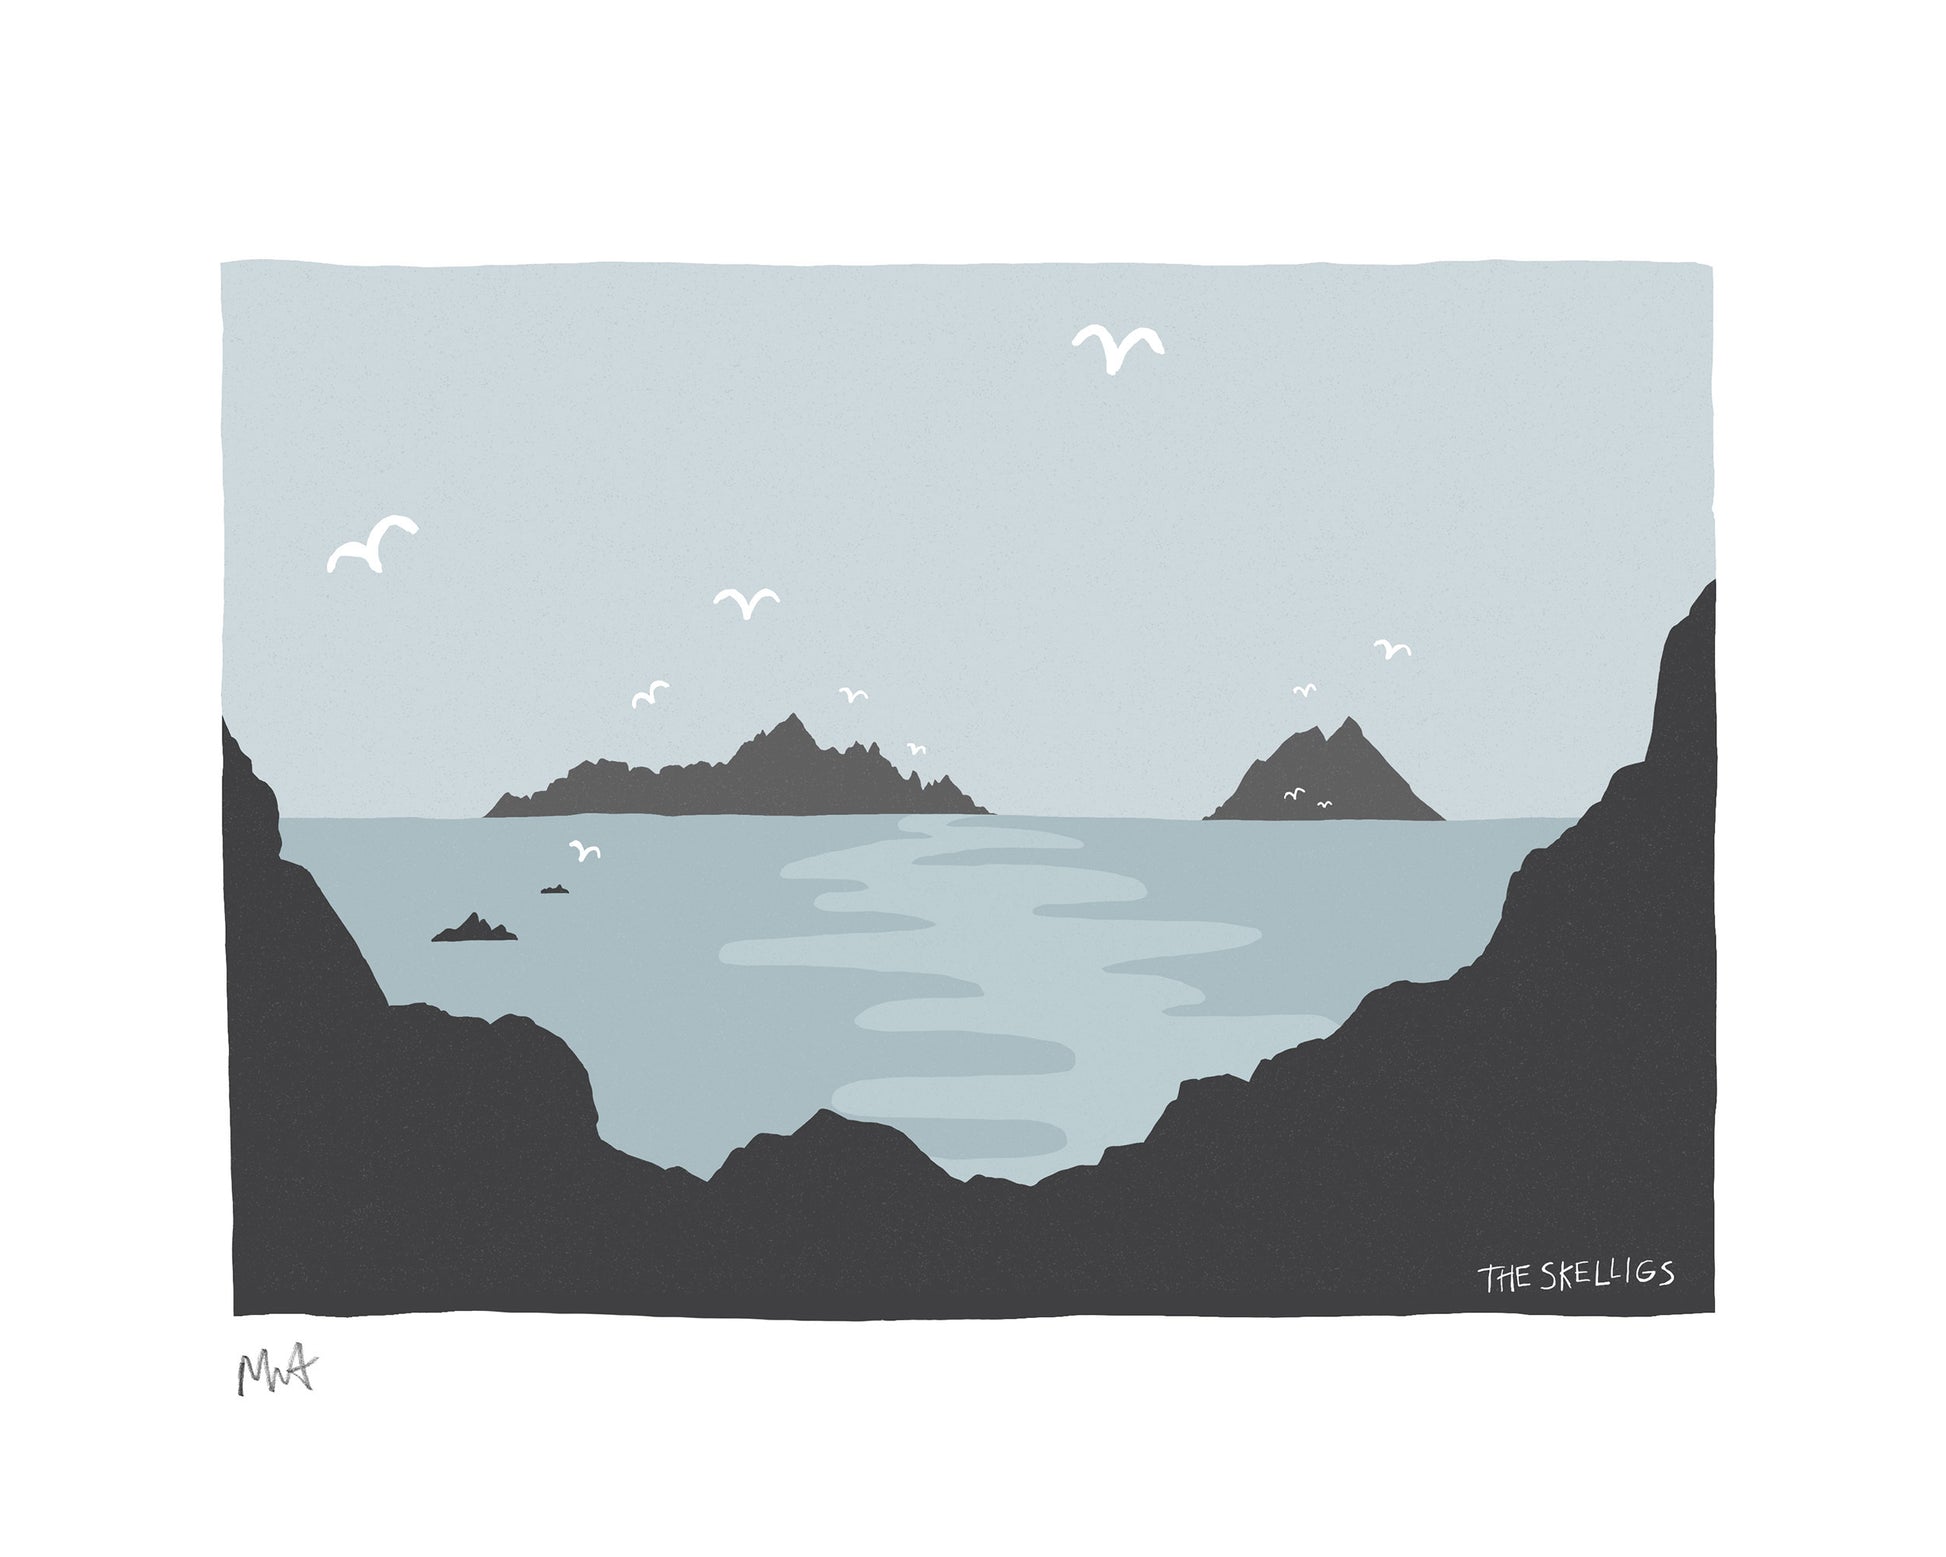 THE SKELLIGS, Kerry, Ireland – A4 / A3 print